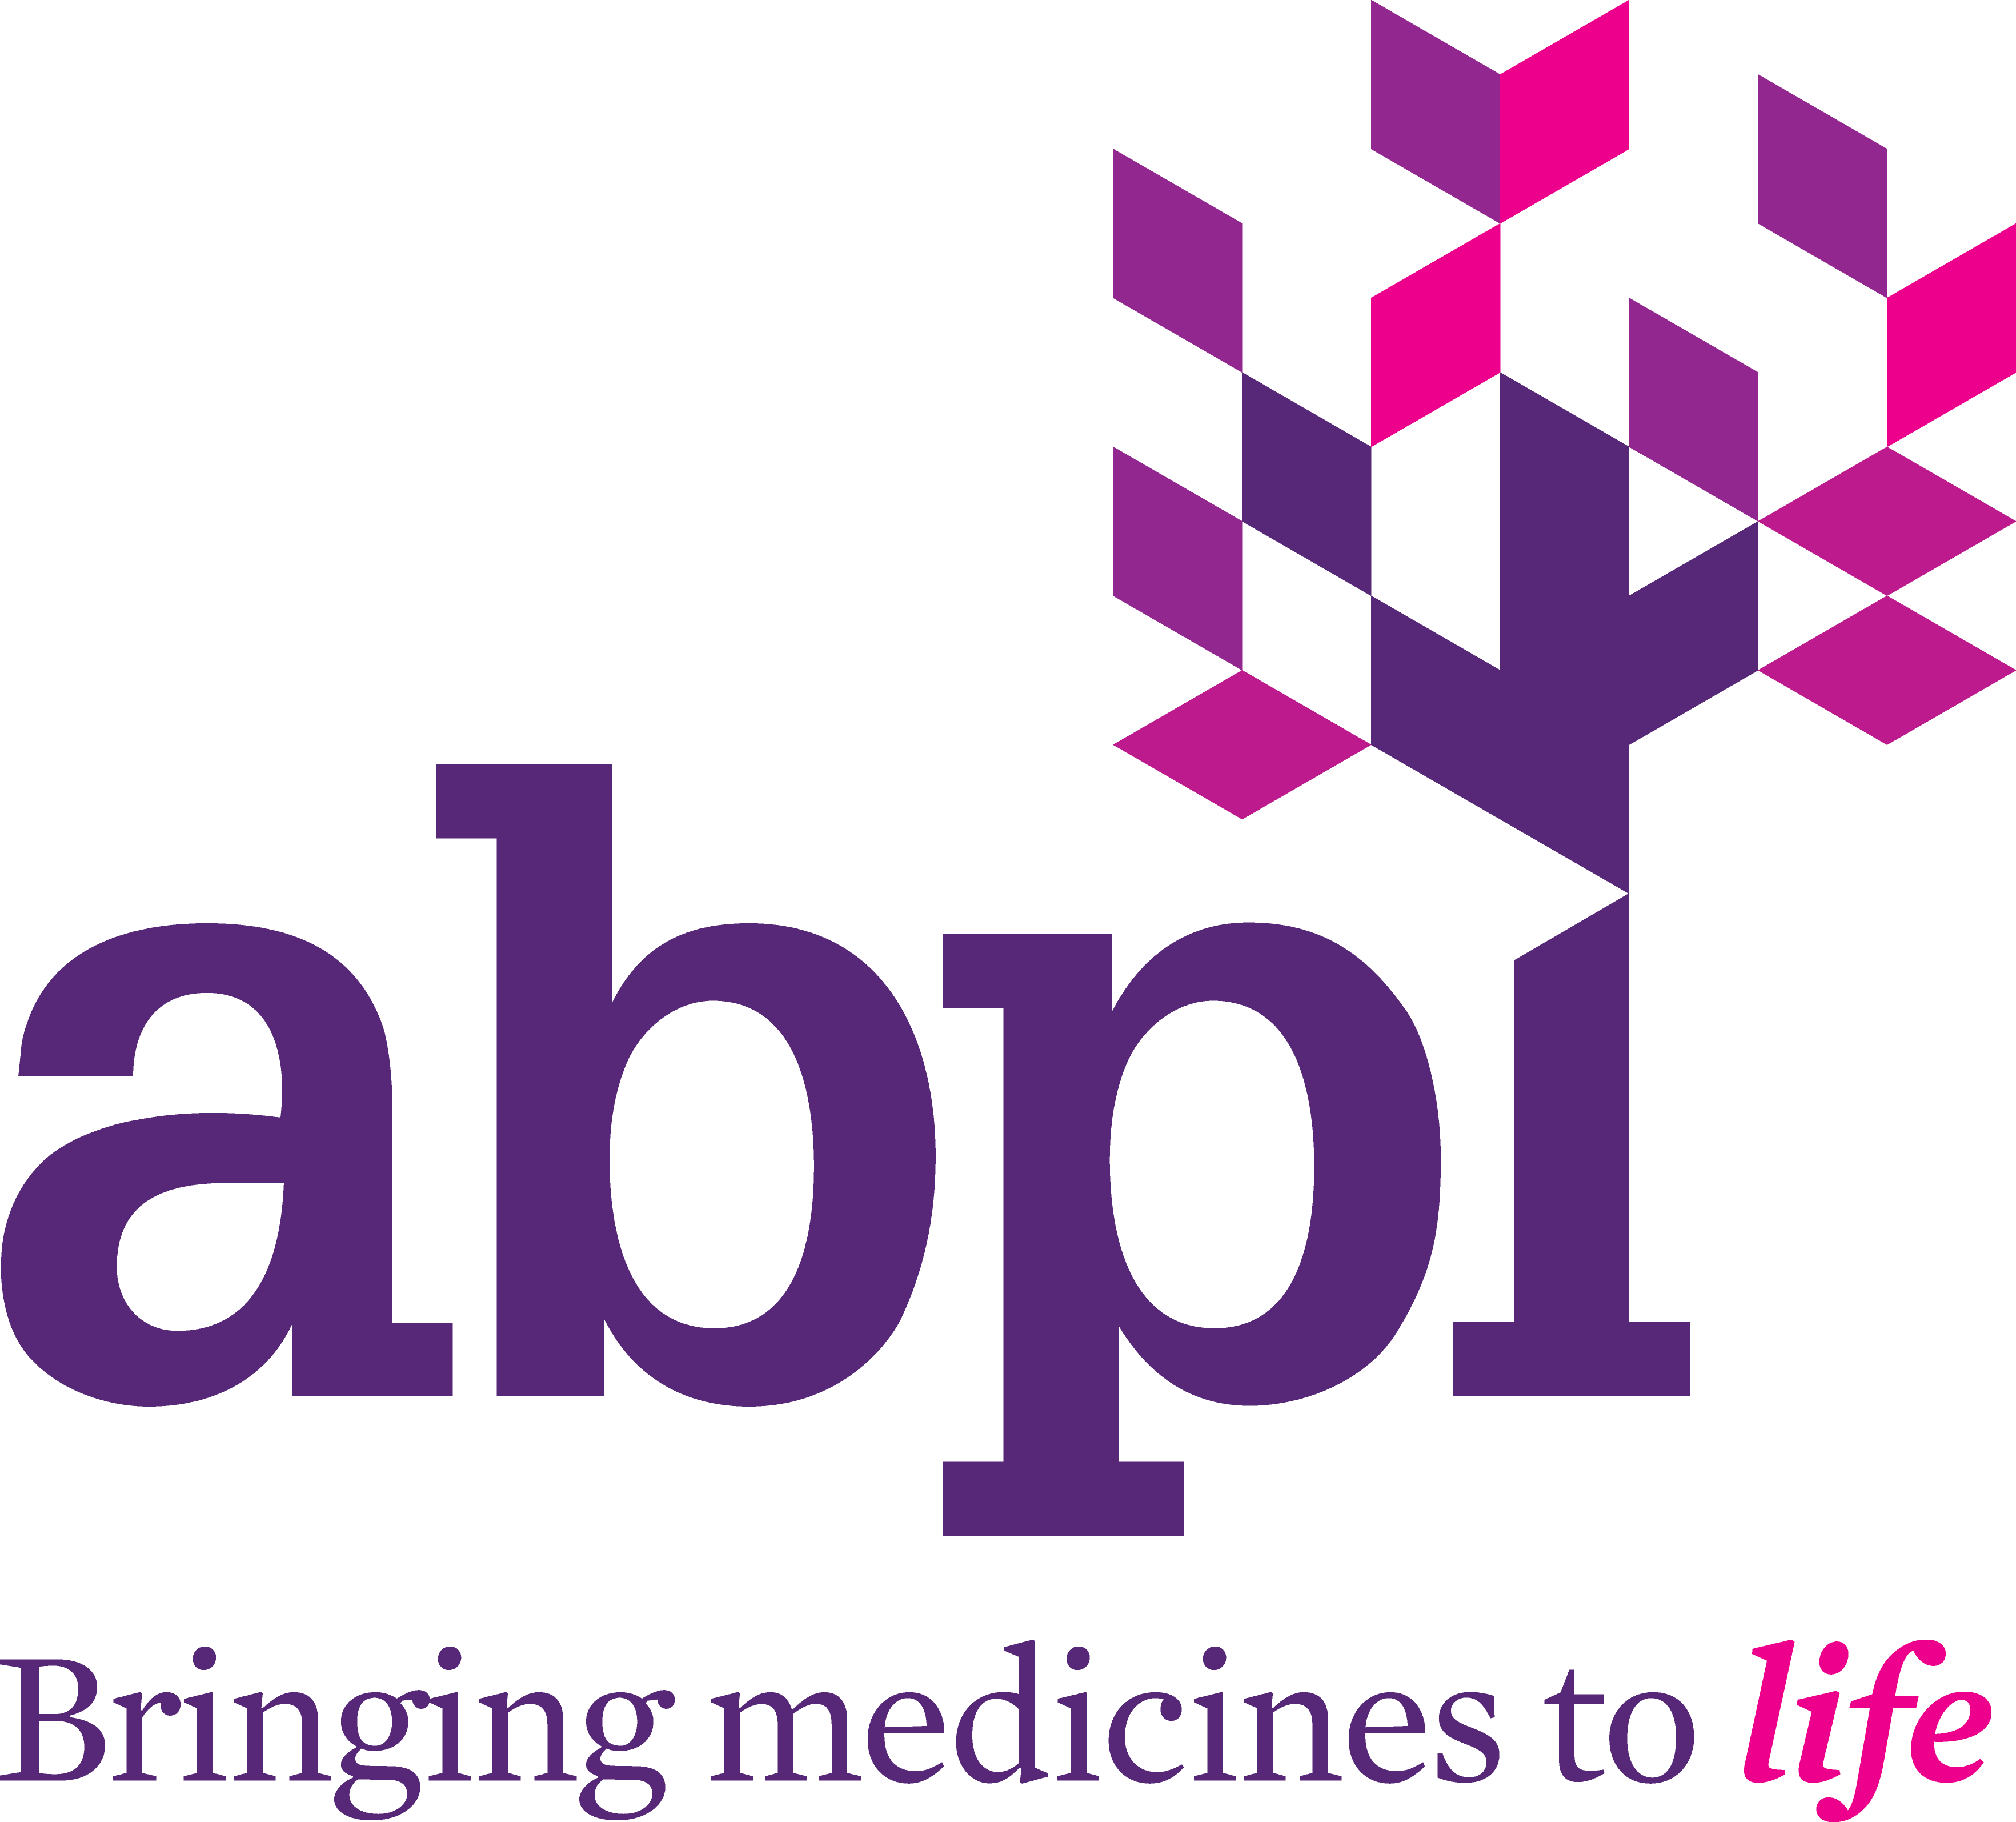 Association of the British Pharmaceutical Industry